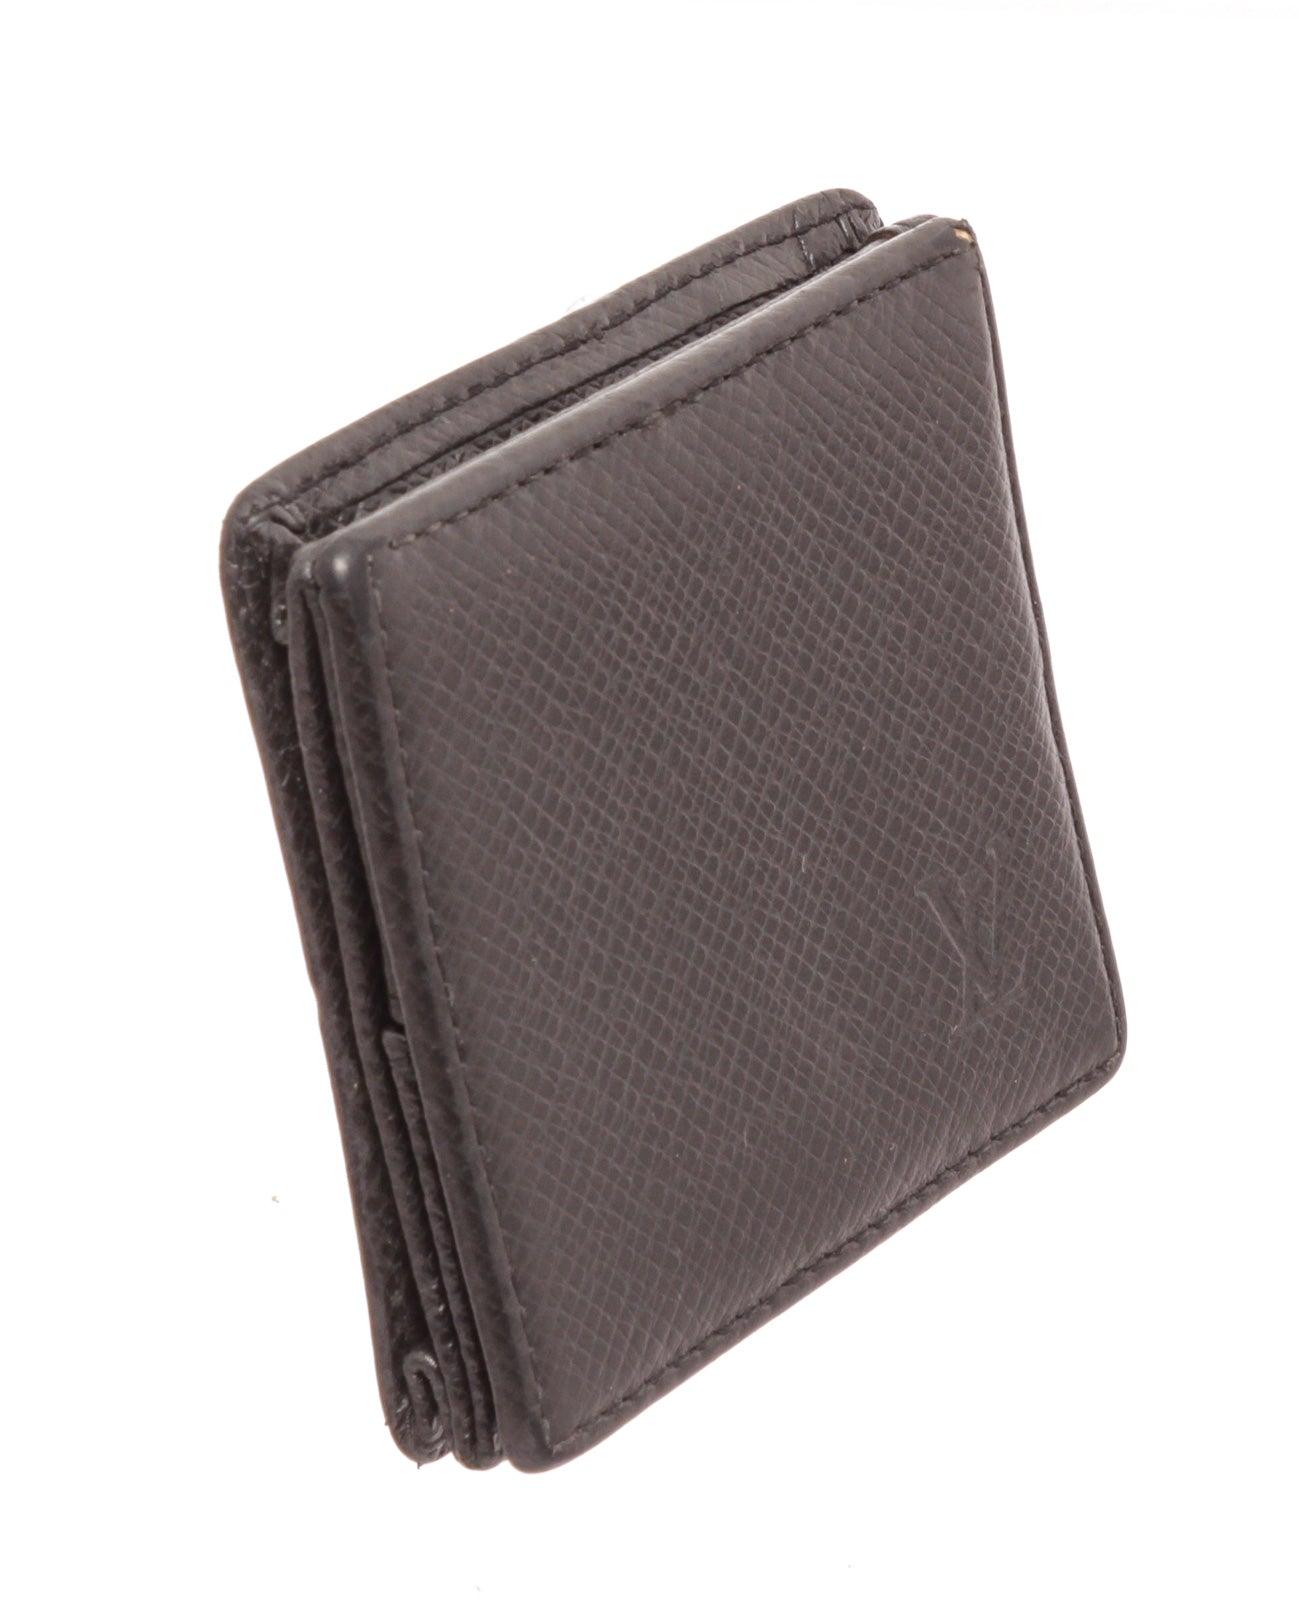 Louis Vuitton Black Taiga Leather Boite Coin Case Wallet with silver-tone hardware, tonal taiga lining, one open coin compartment and overall snap button closure.
28902MSC